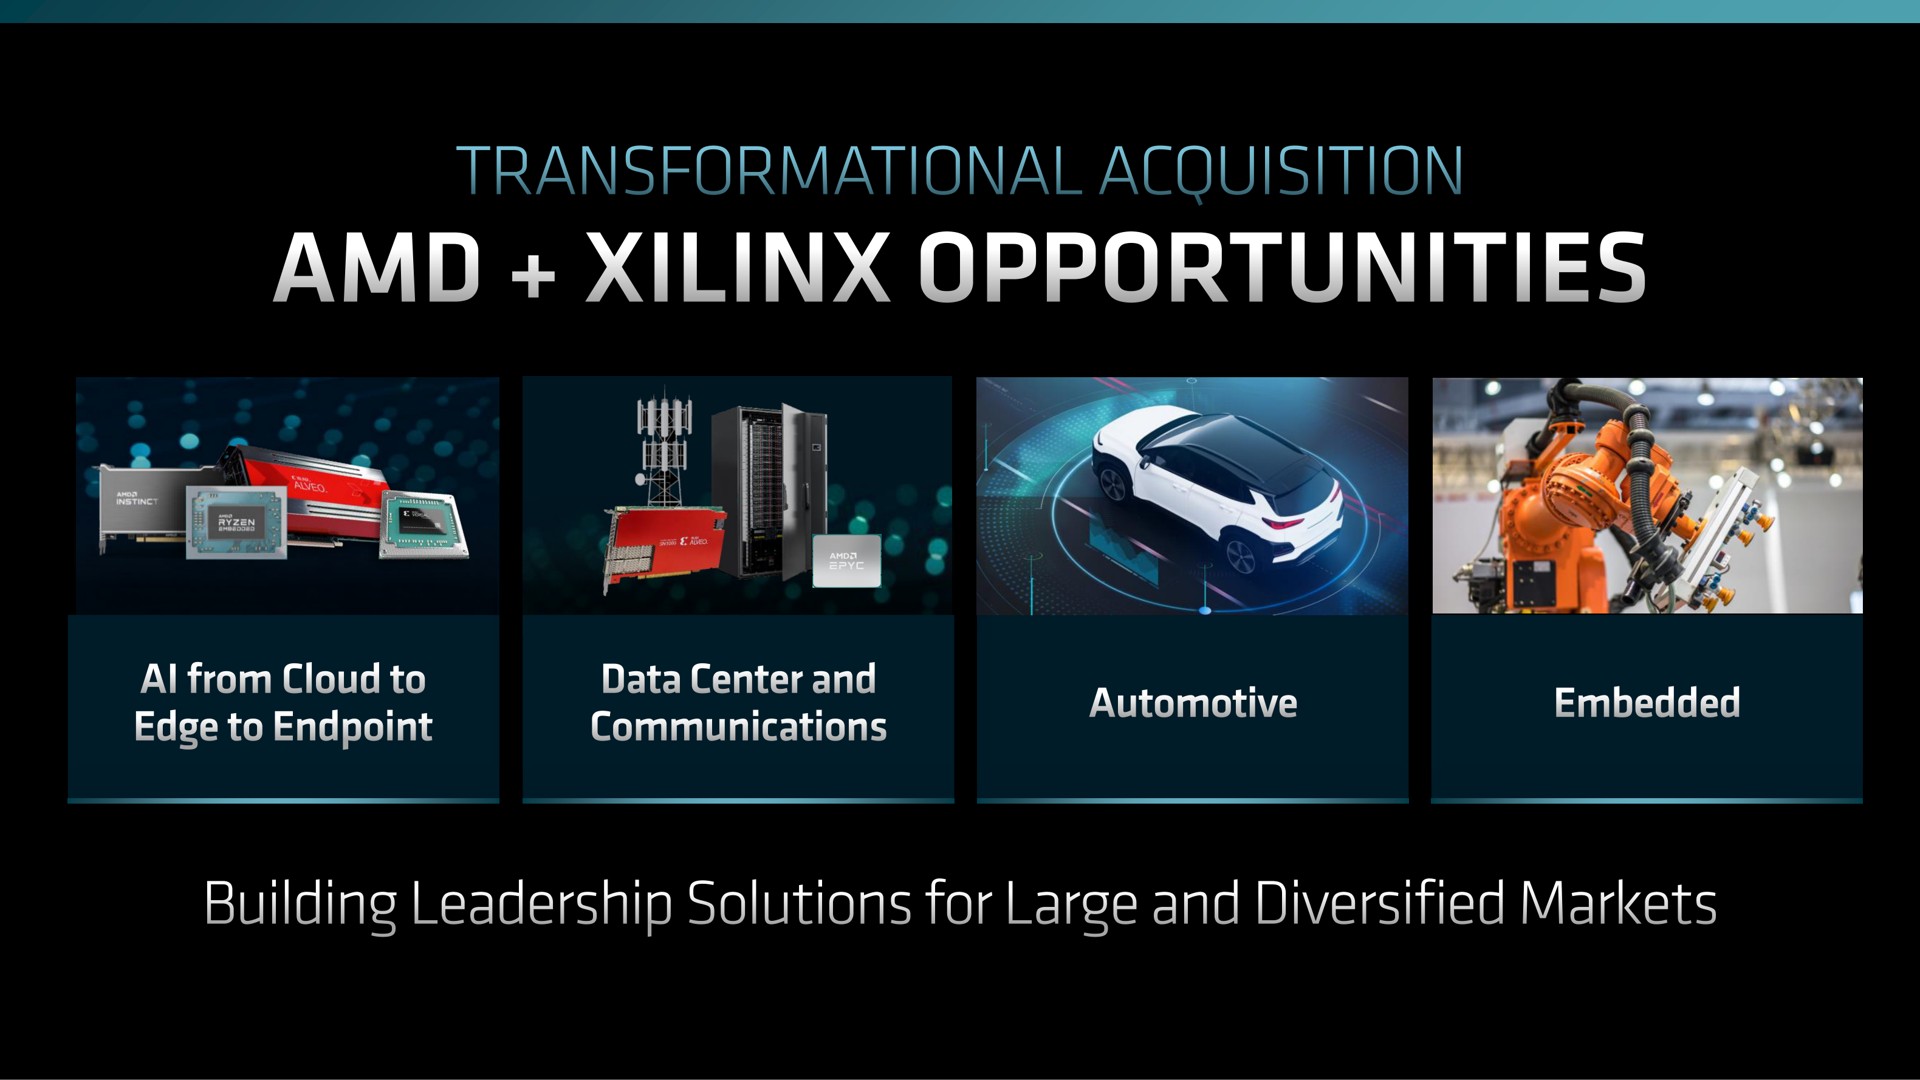 acquisition opportunities building leadership solutions for large and diversified markets | AMD